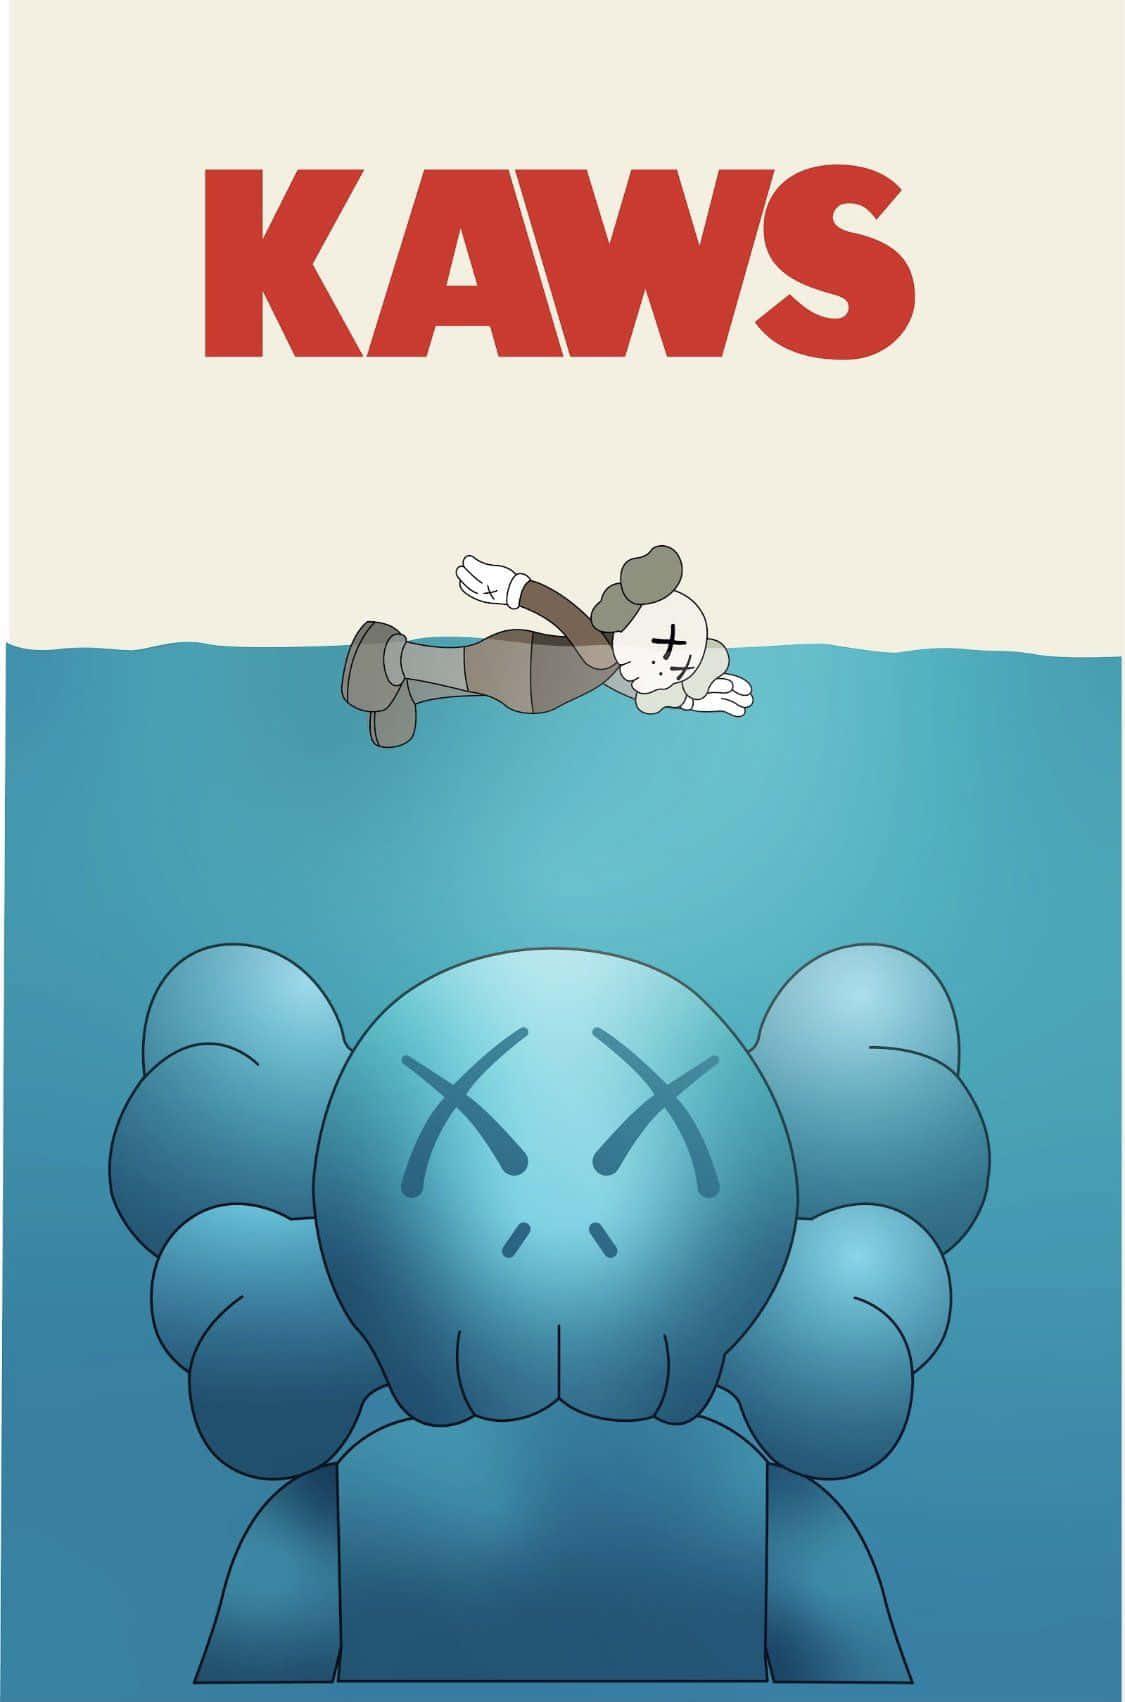 Show Off Your Street Art Style With This Bold Kaws